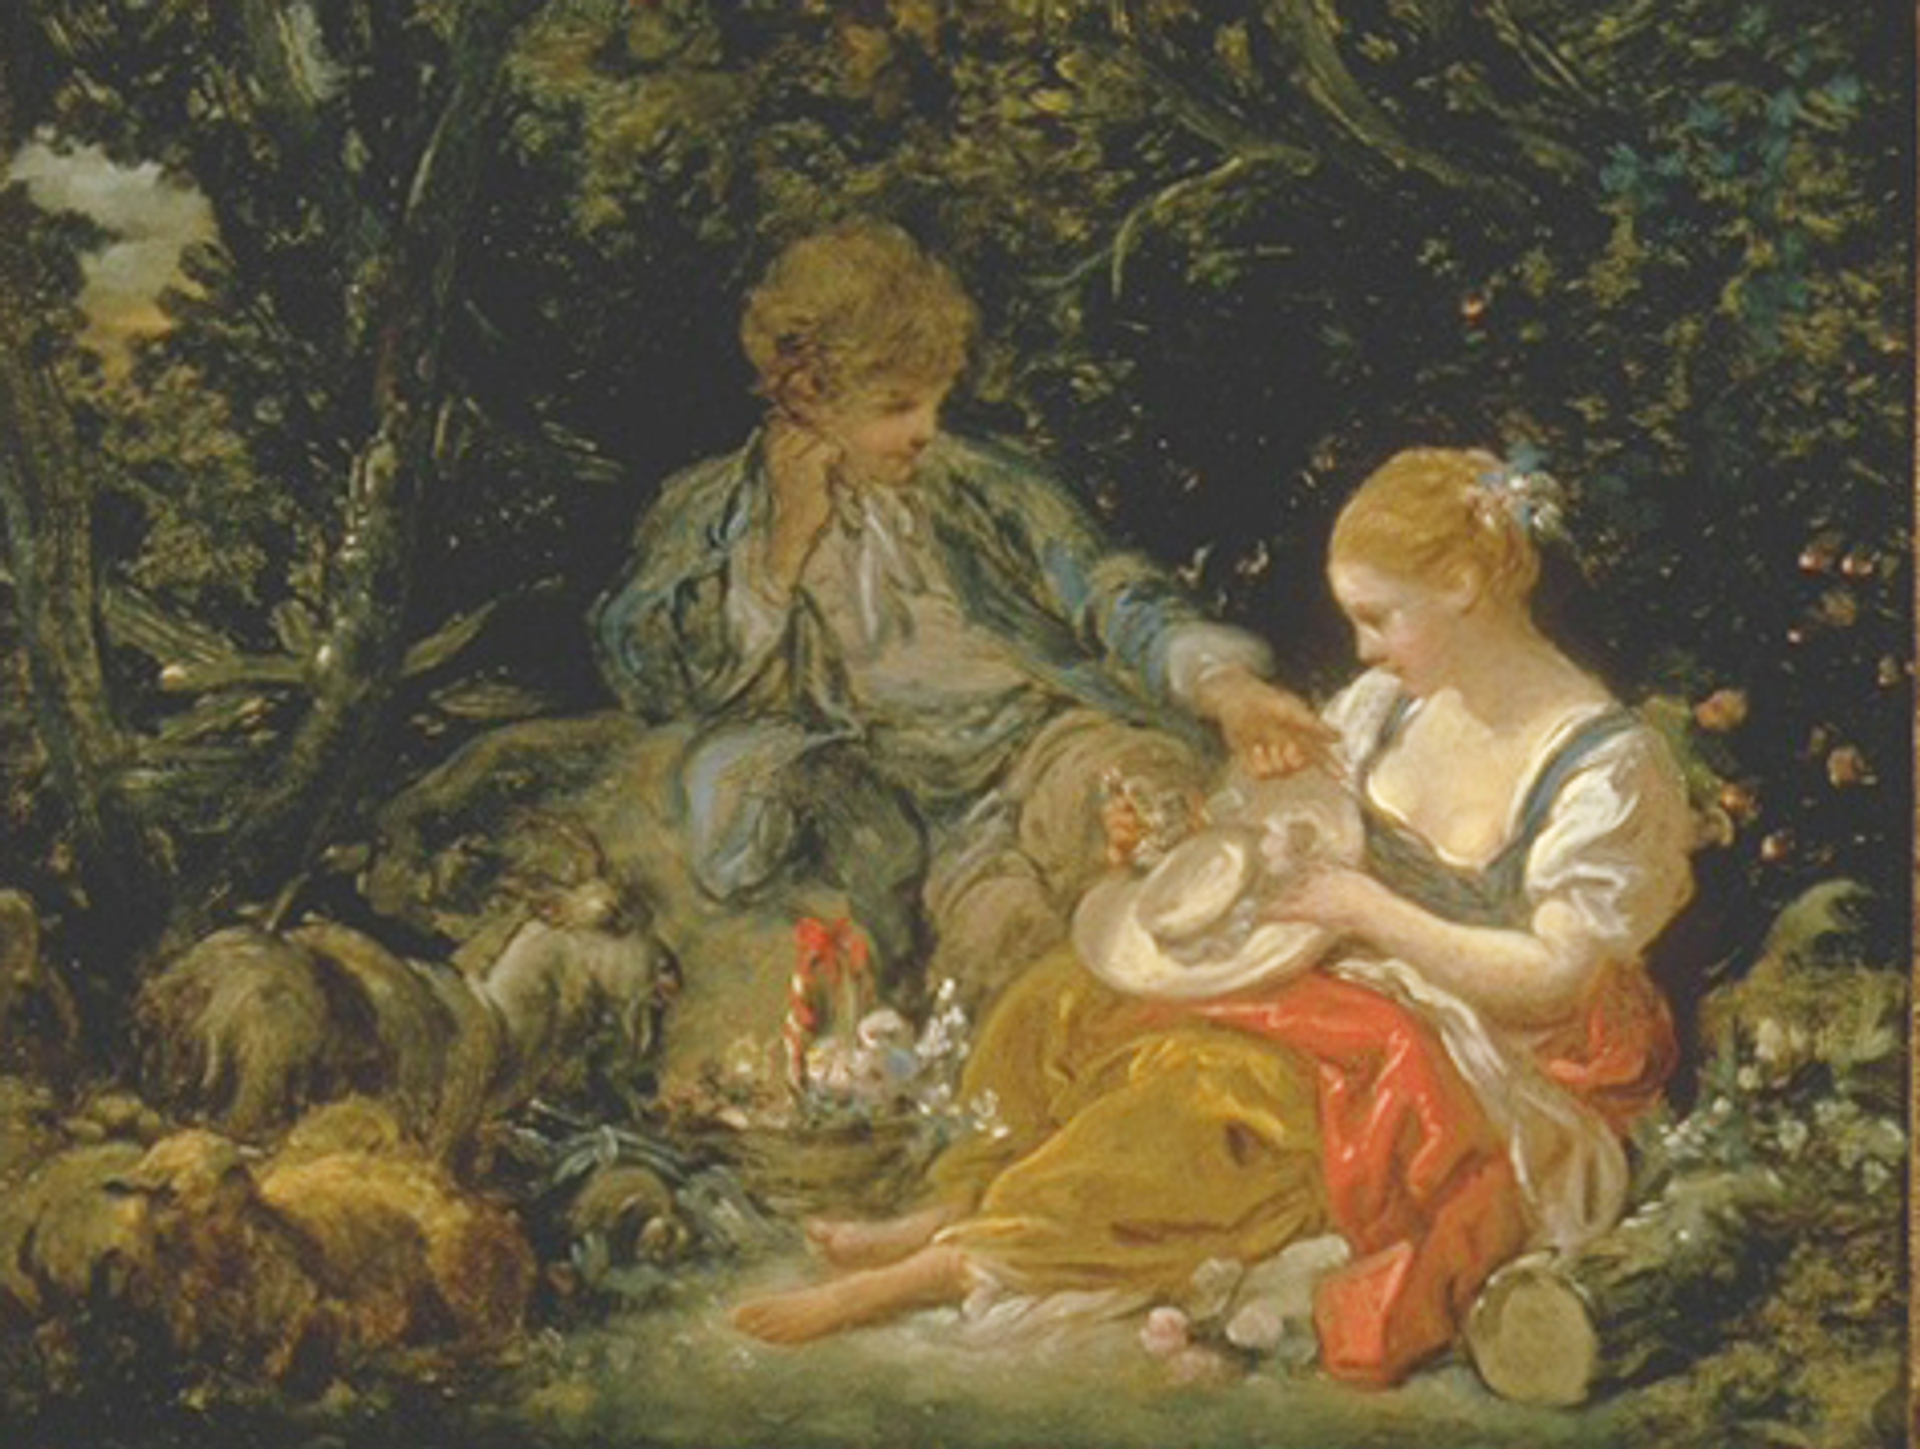 In this painting by Boucher, two young people can be seen interacting within a garden scene.